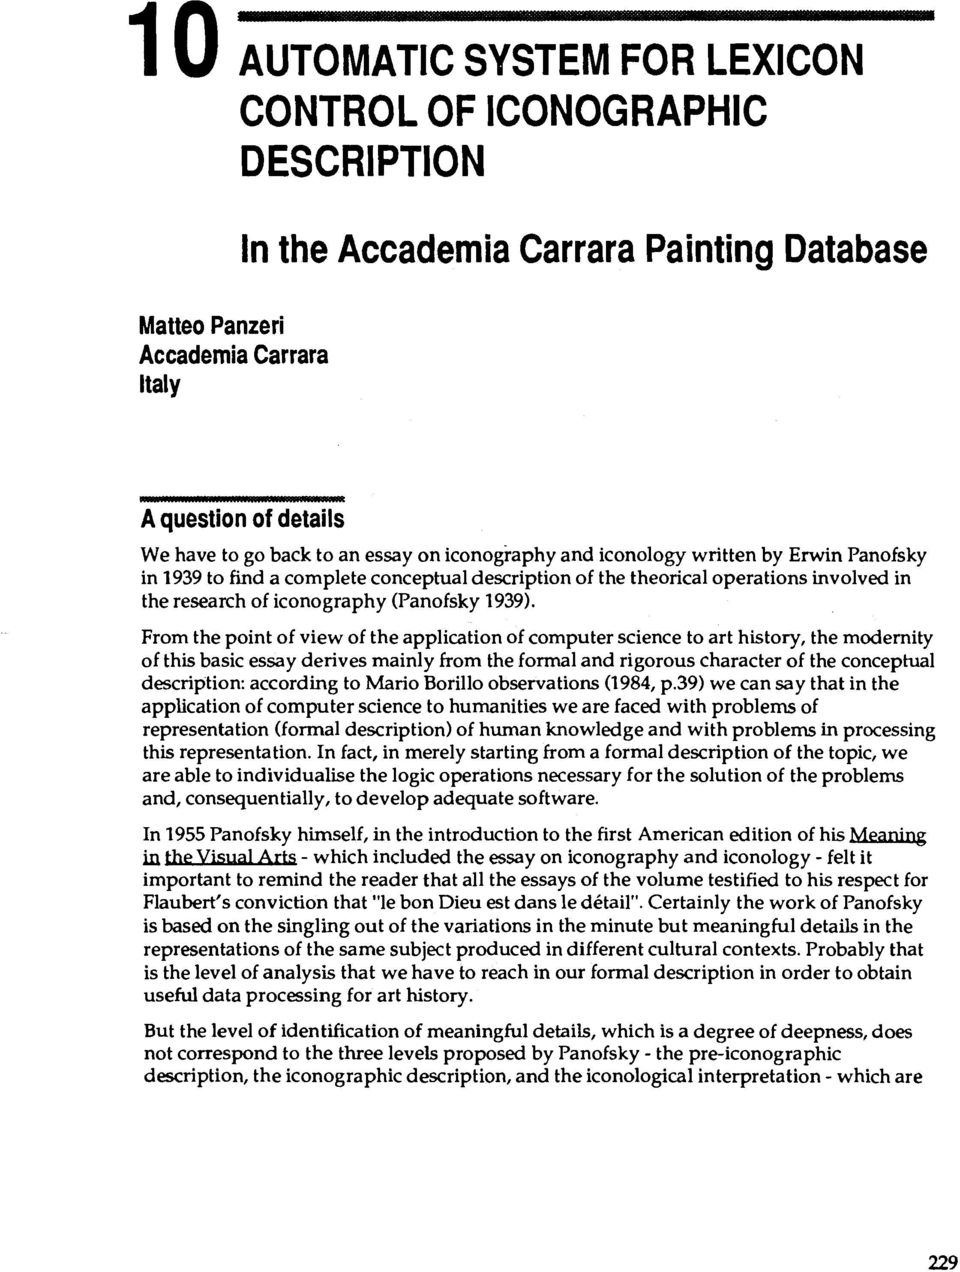 From the point of view of the application of computer science to art history, the modernity of this basic essay derives mainly from the formal and rigorous character of the conceptual description: